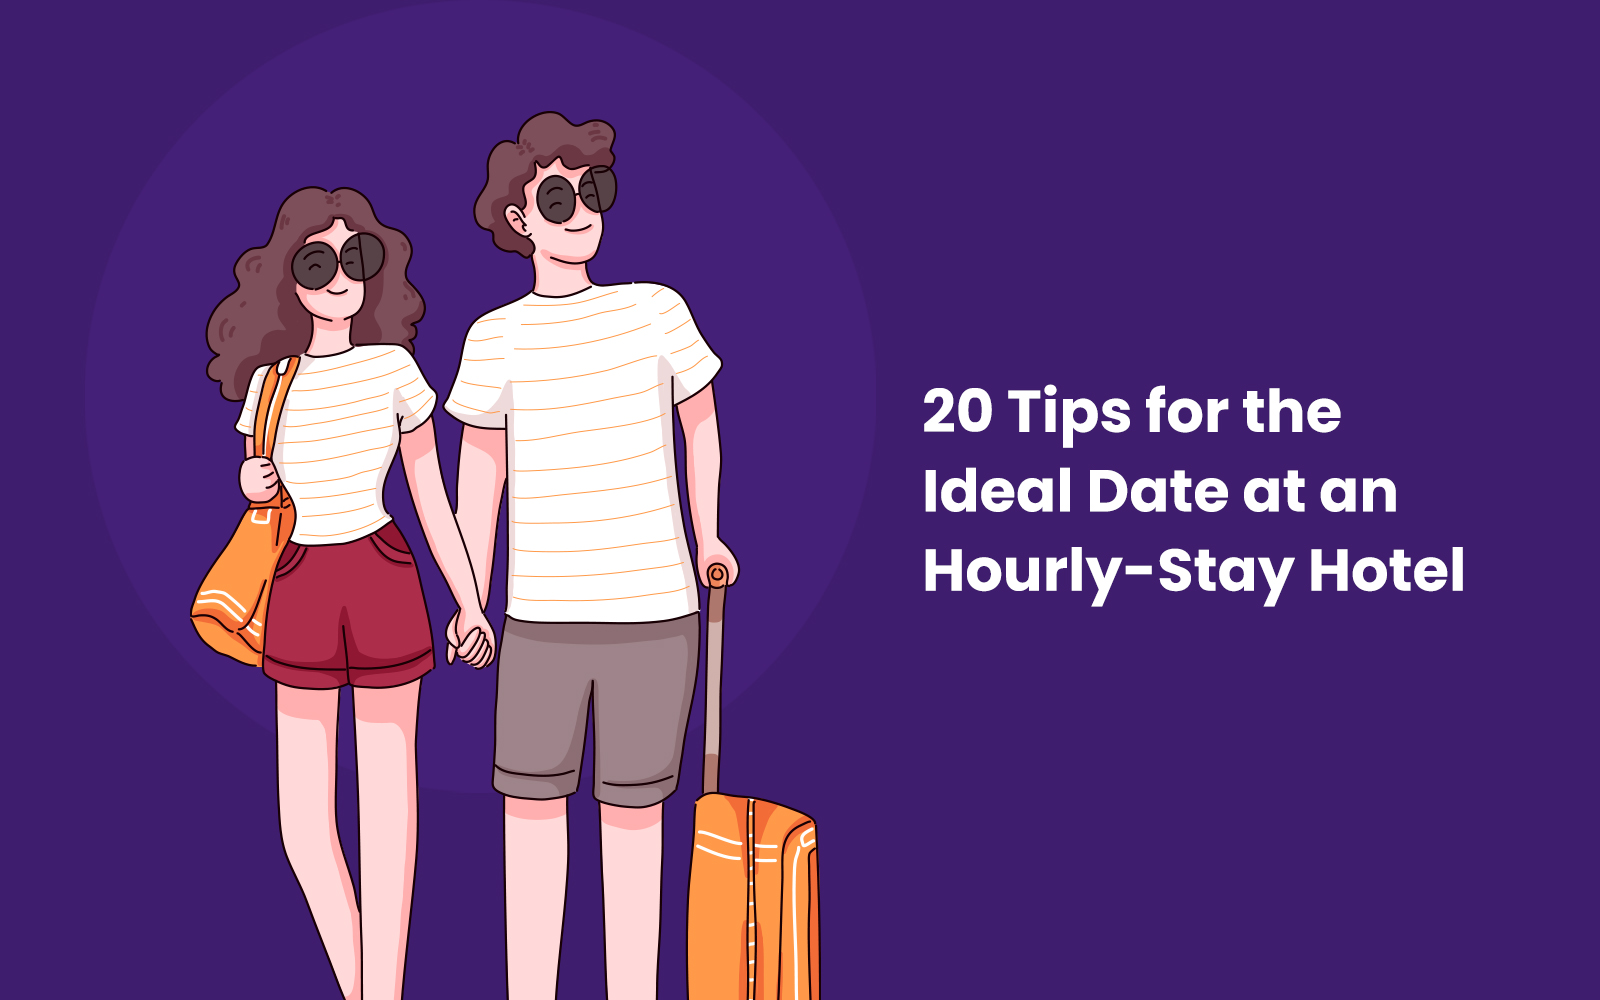 20 Tips for the Ideal Date at an Hourly-Stay Hotel